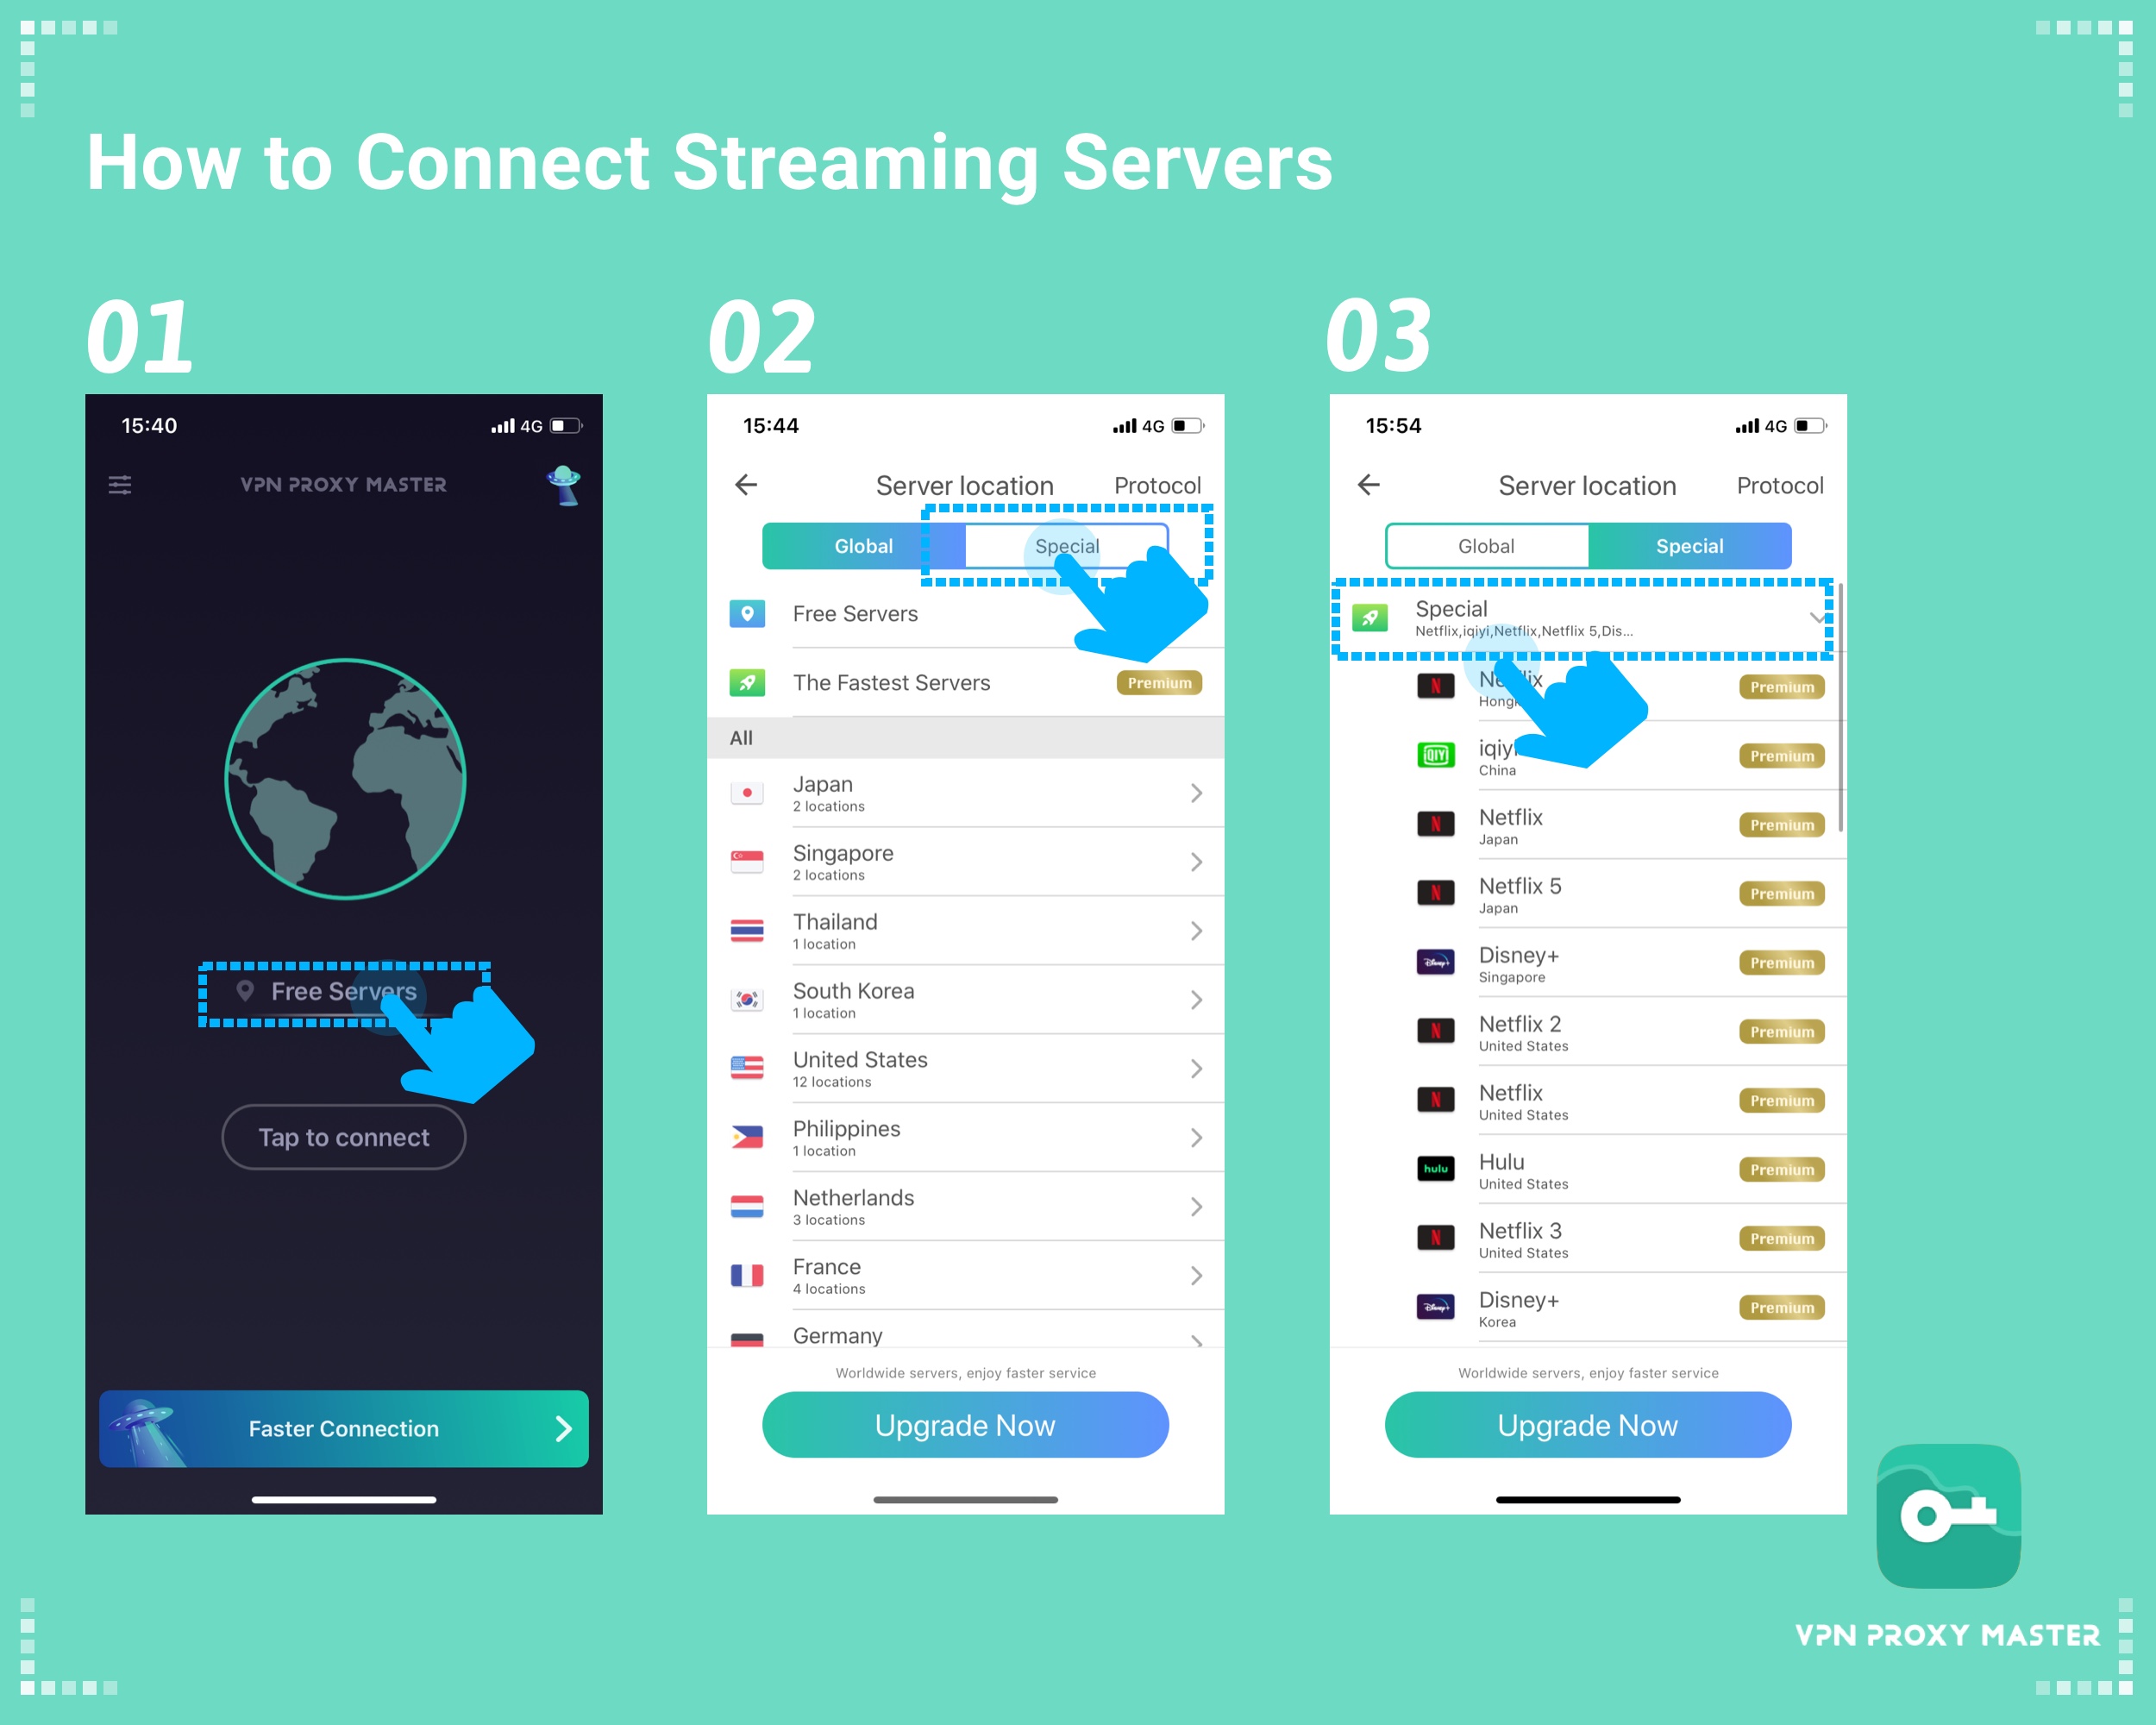 ios-How_to_Connect_Streaming_Servers.jpg